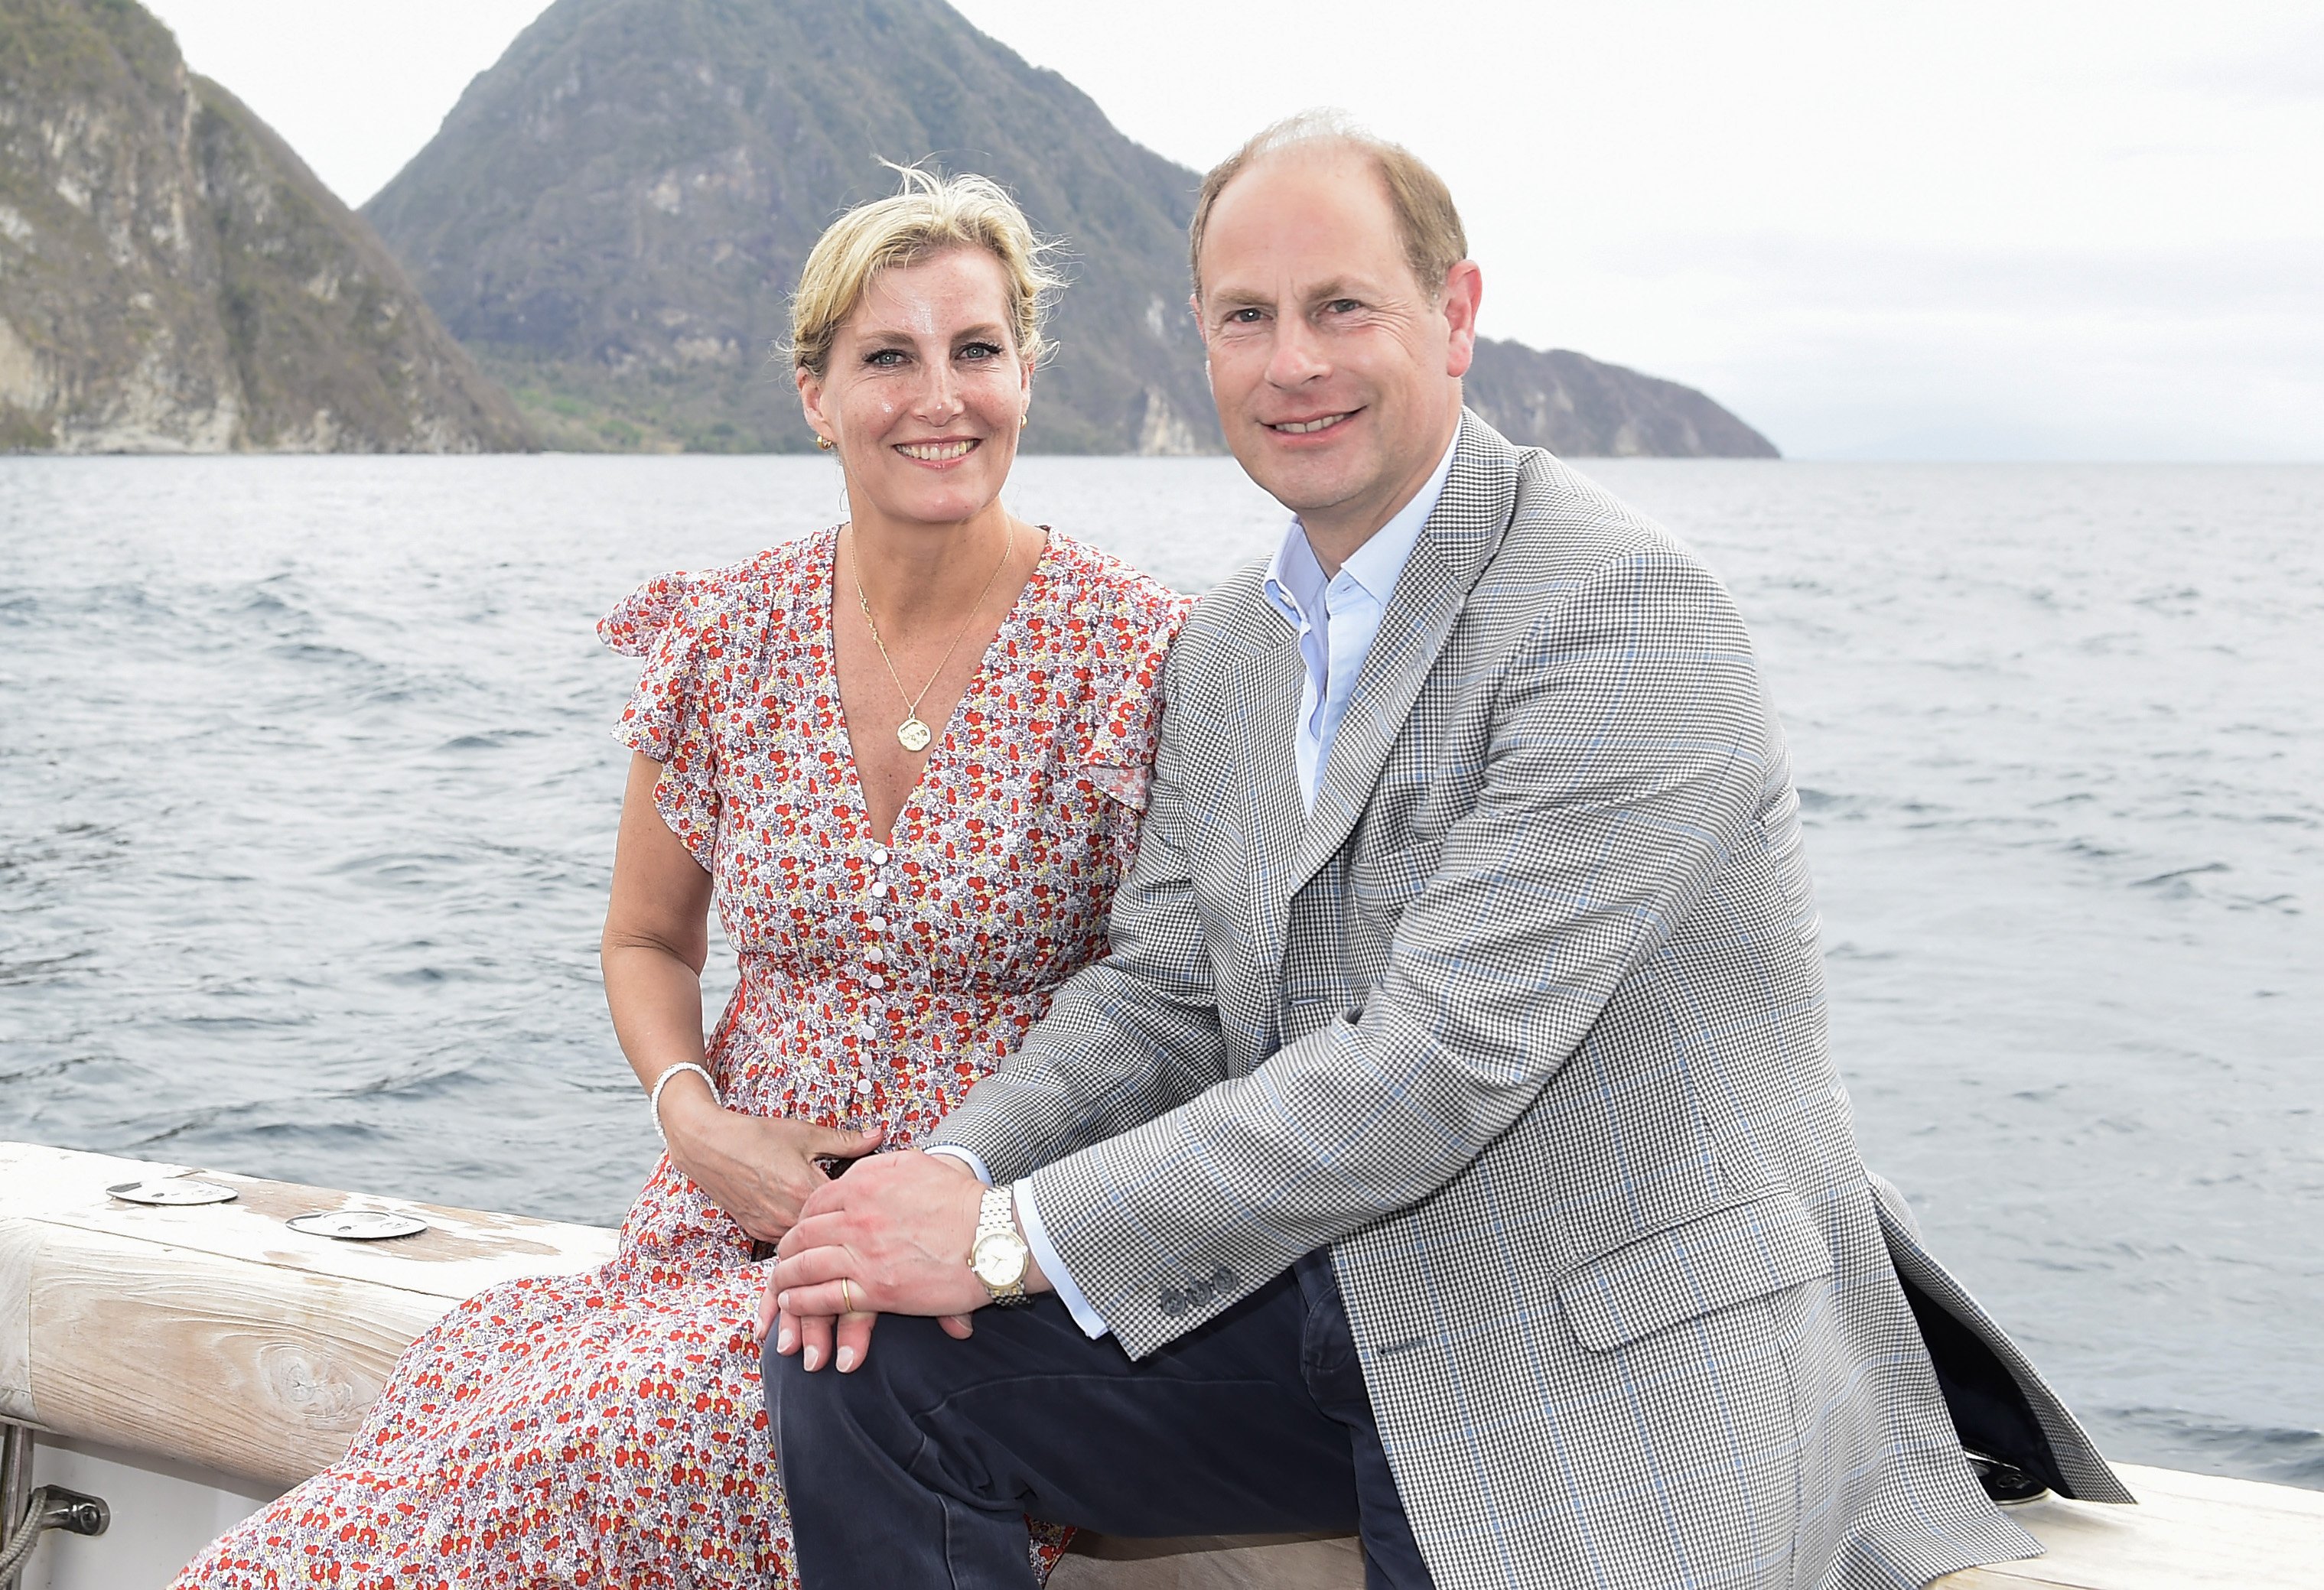 Sophie, Countess of Wessex, and Prince Edward, Earl of Wessex, depart Soufriere by boat on day six of their Platinum Jubilee Royal Tour of the Caribbean on April 27, 2022, in Soufriere, Saint Lucia. | Source: Getty Images